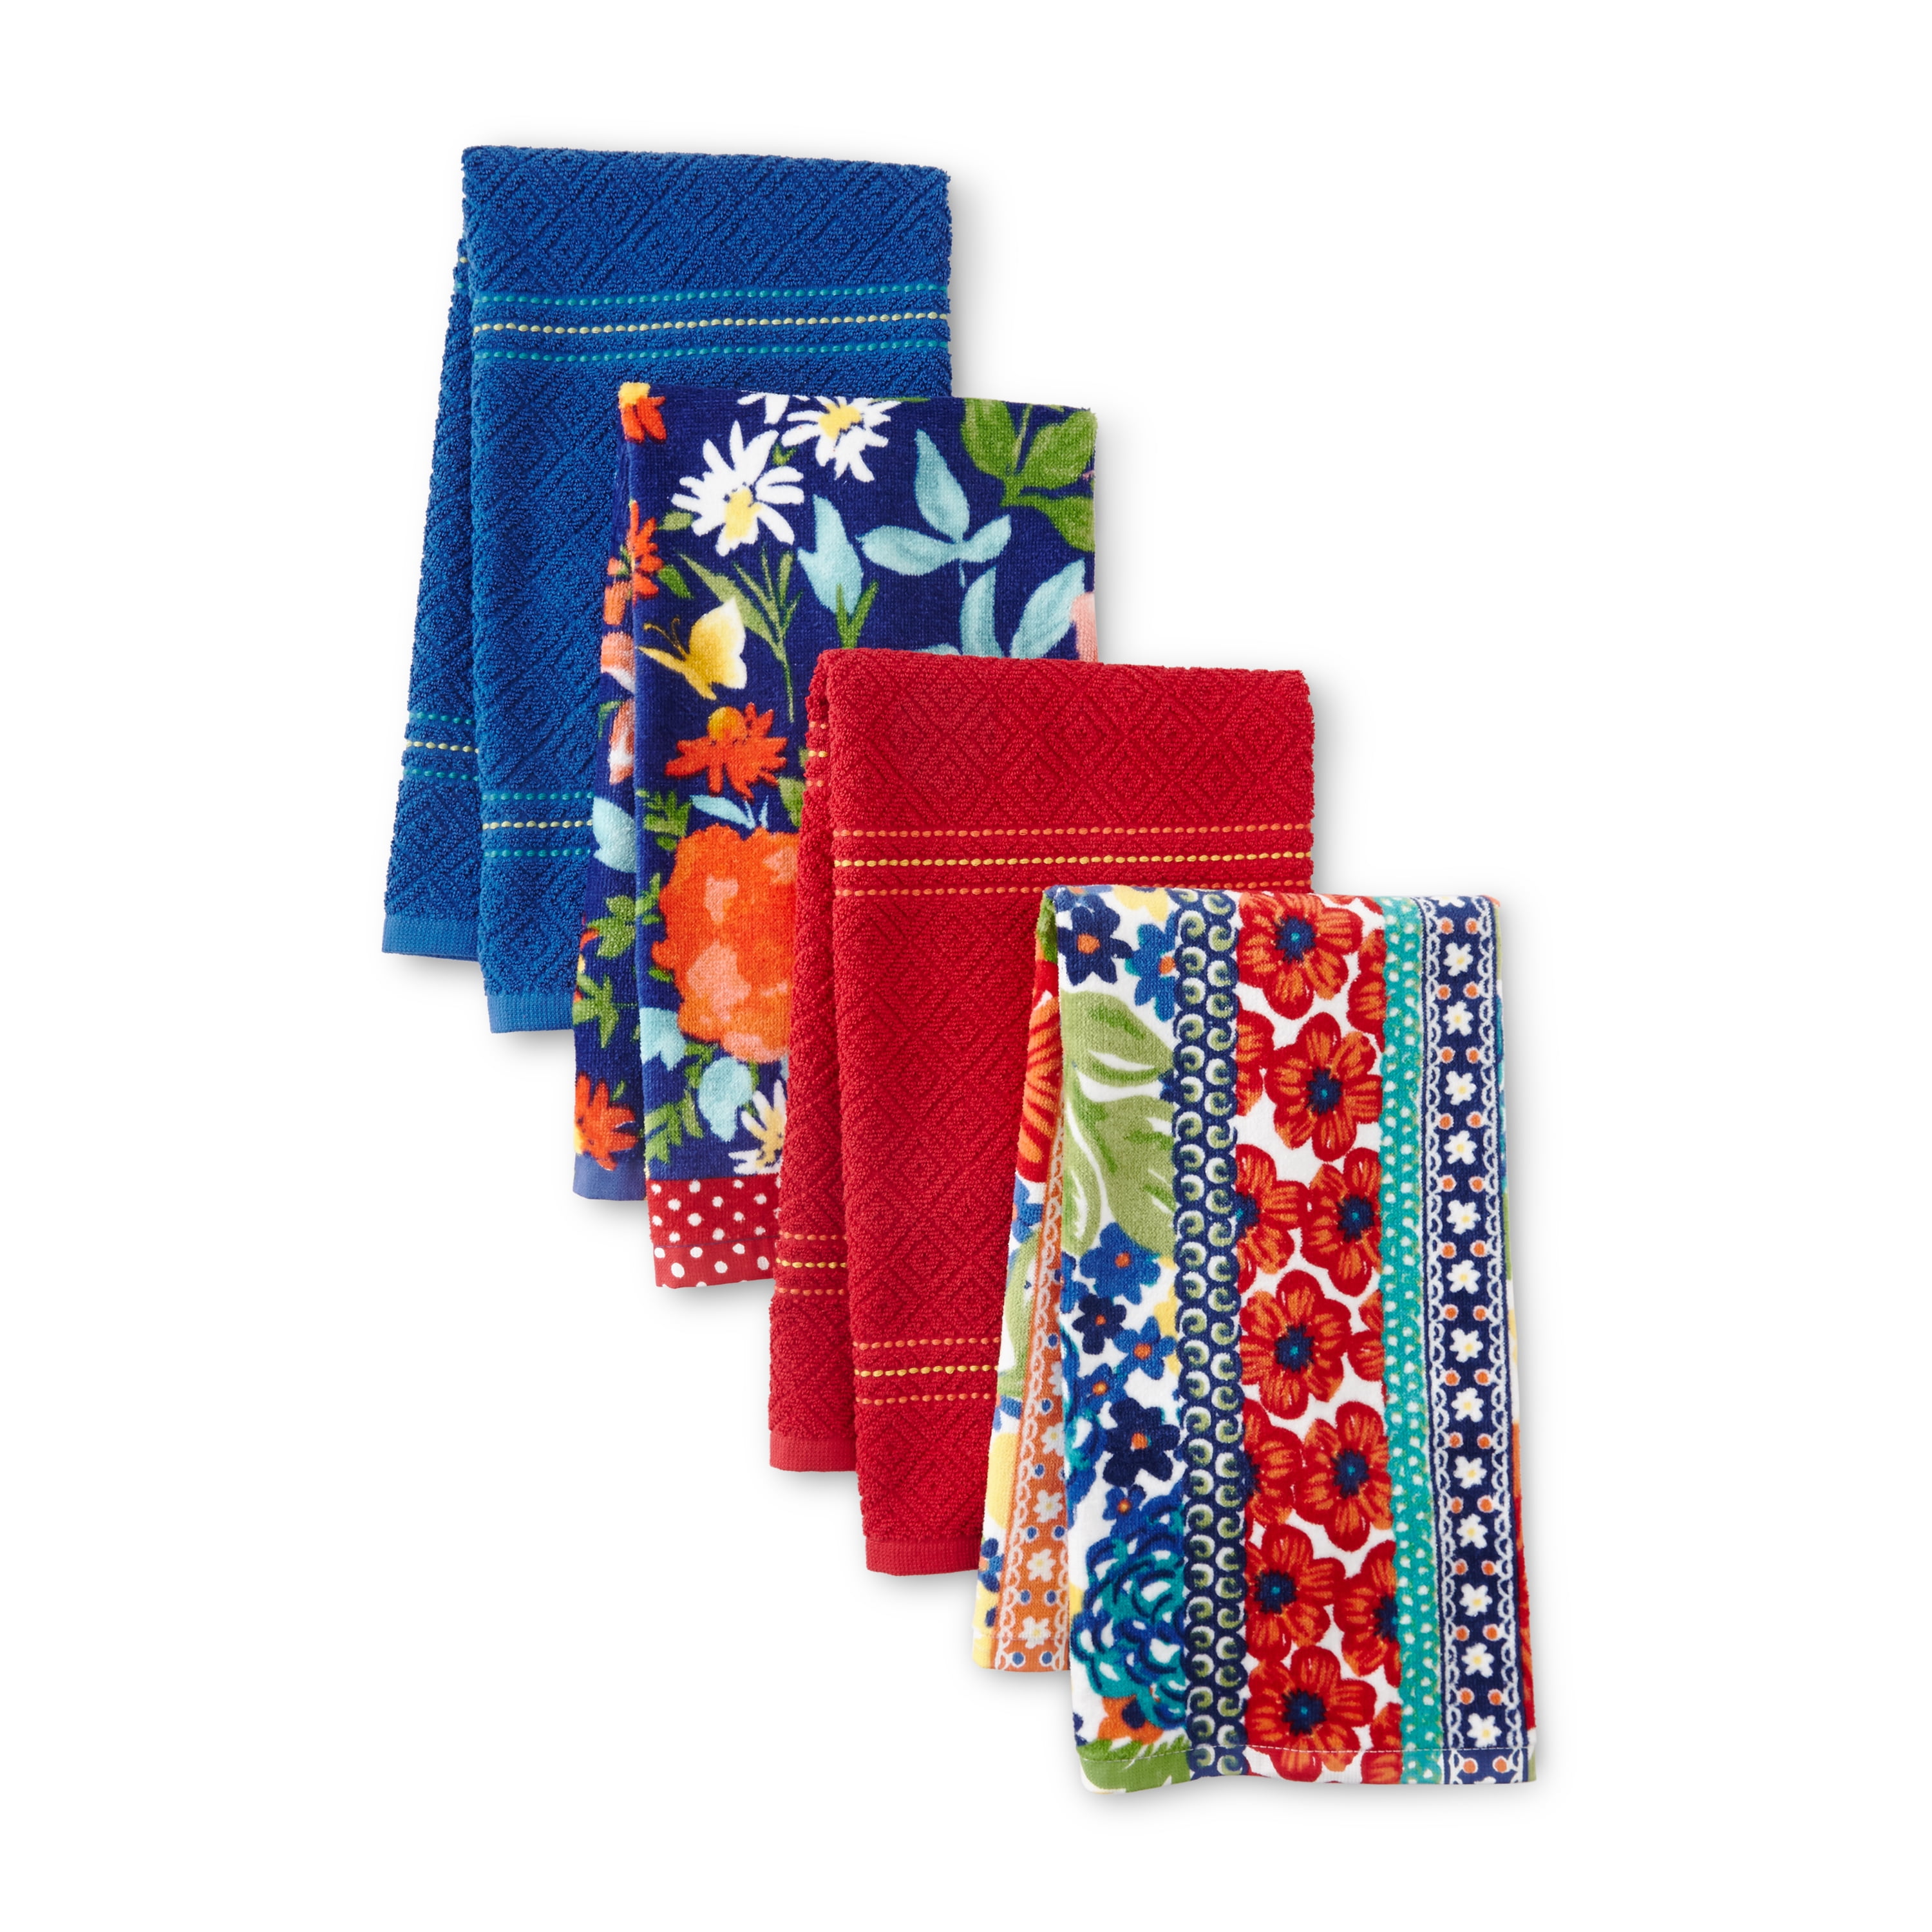 The Pioneer Woman Gorgeous Garden Kitchen Towels, 4 Pack